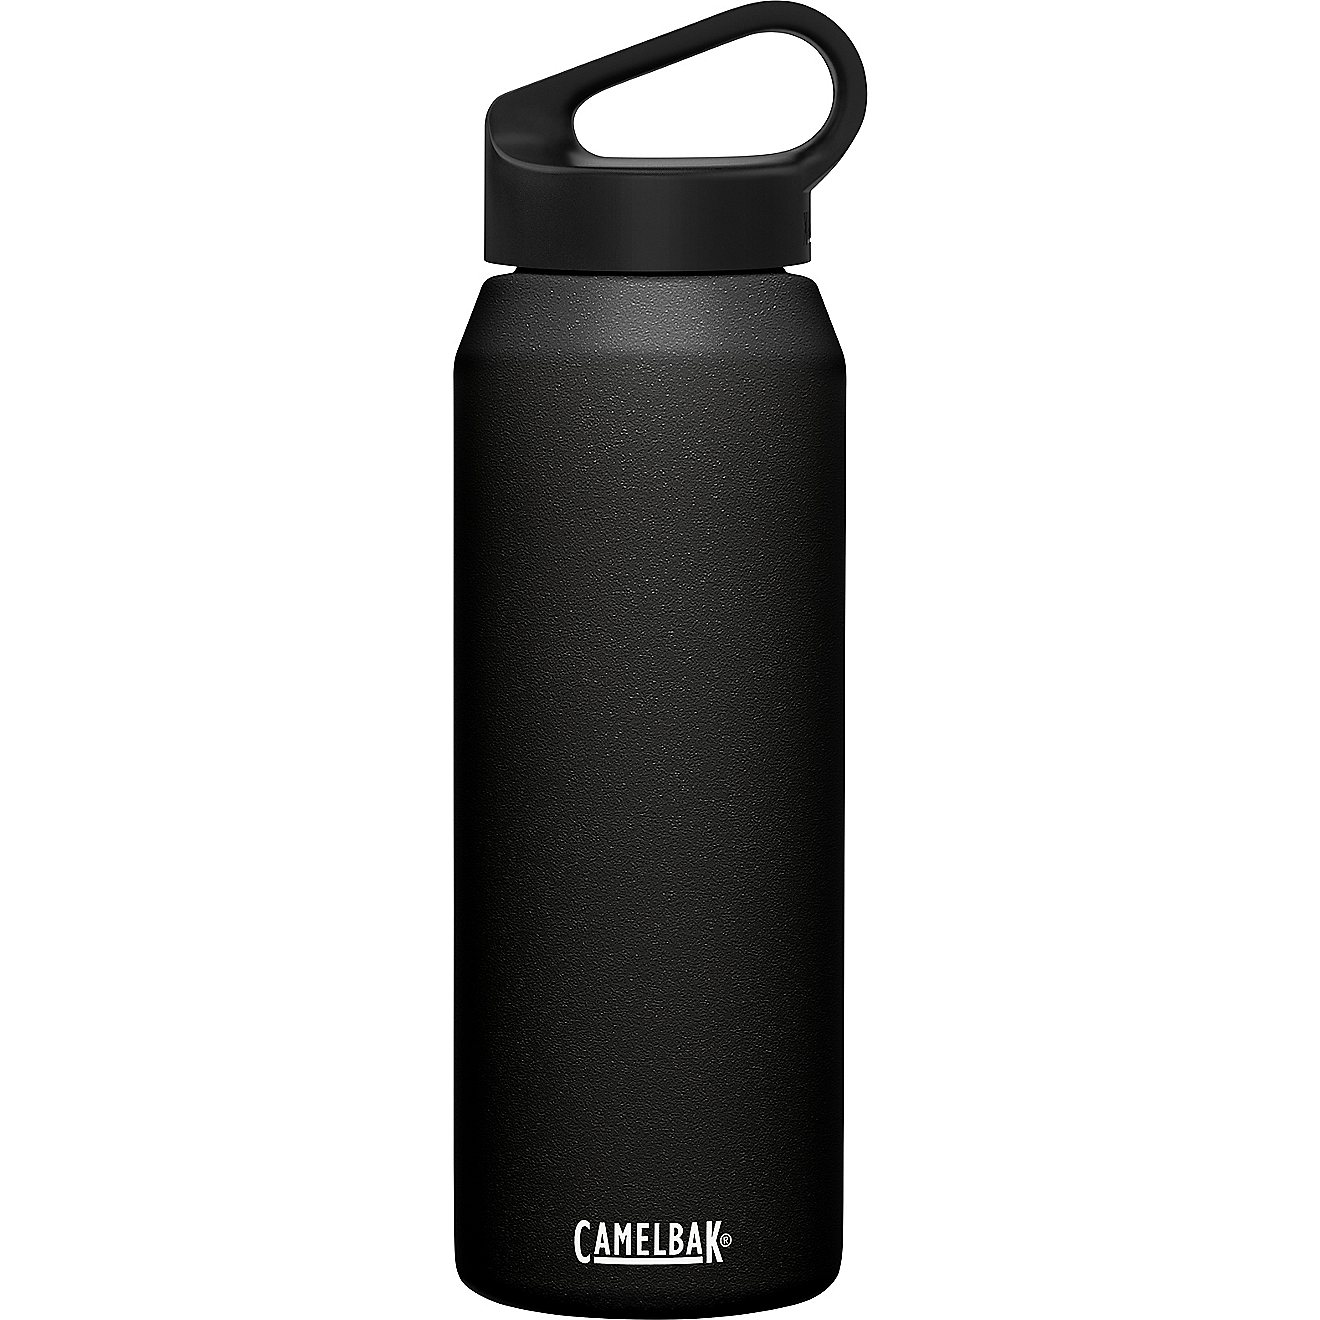 CamelBak Carry Cap 32 oz Insulated Stainless Steel Water Bottle                                                                  - view number 1